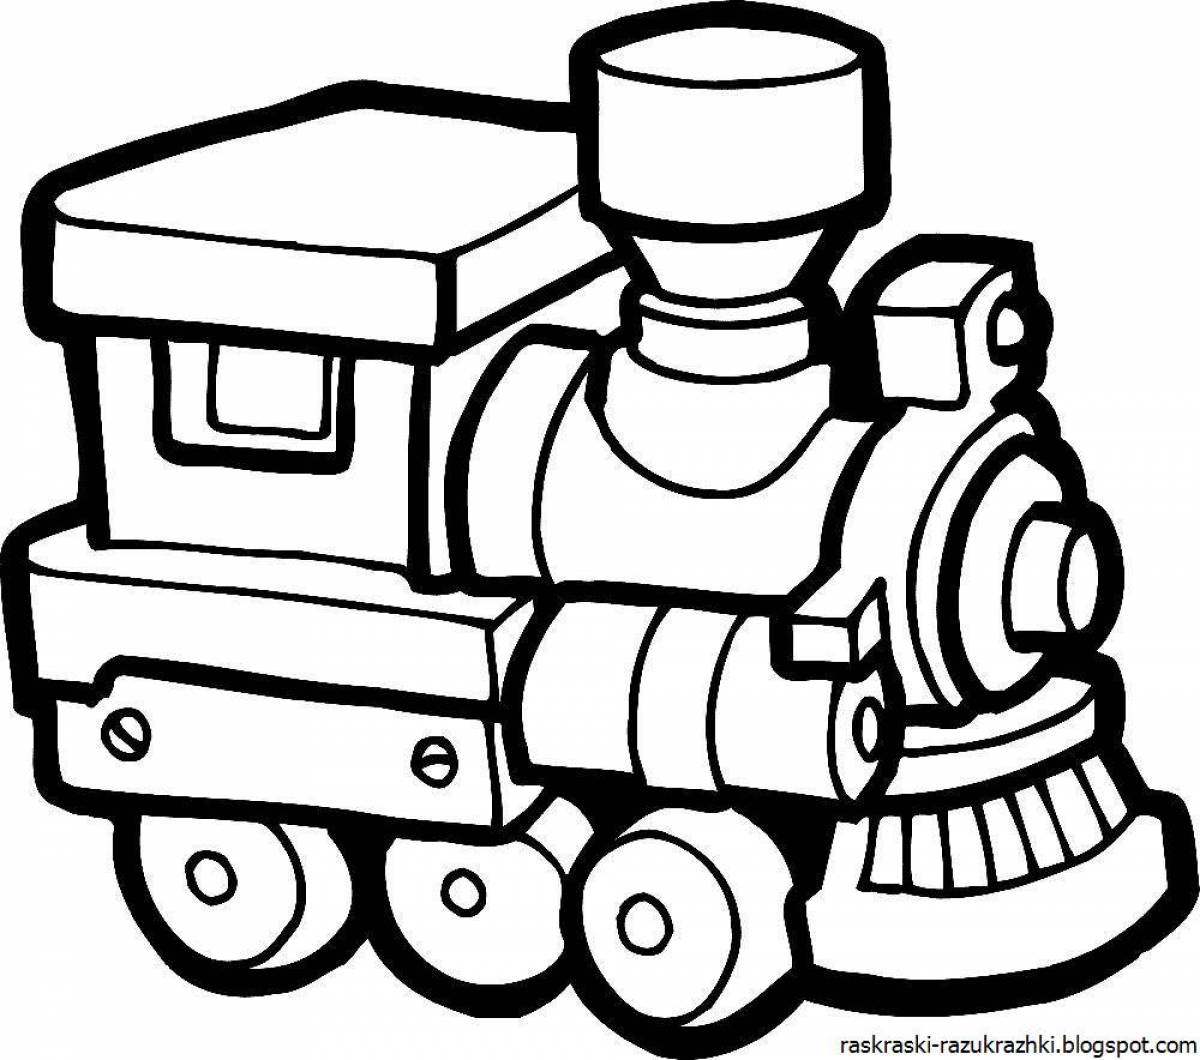 Amazing coloring pages for 3-4 year olds with toys